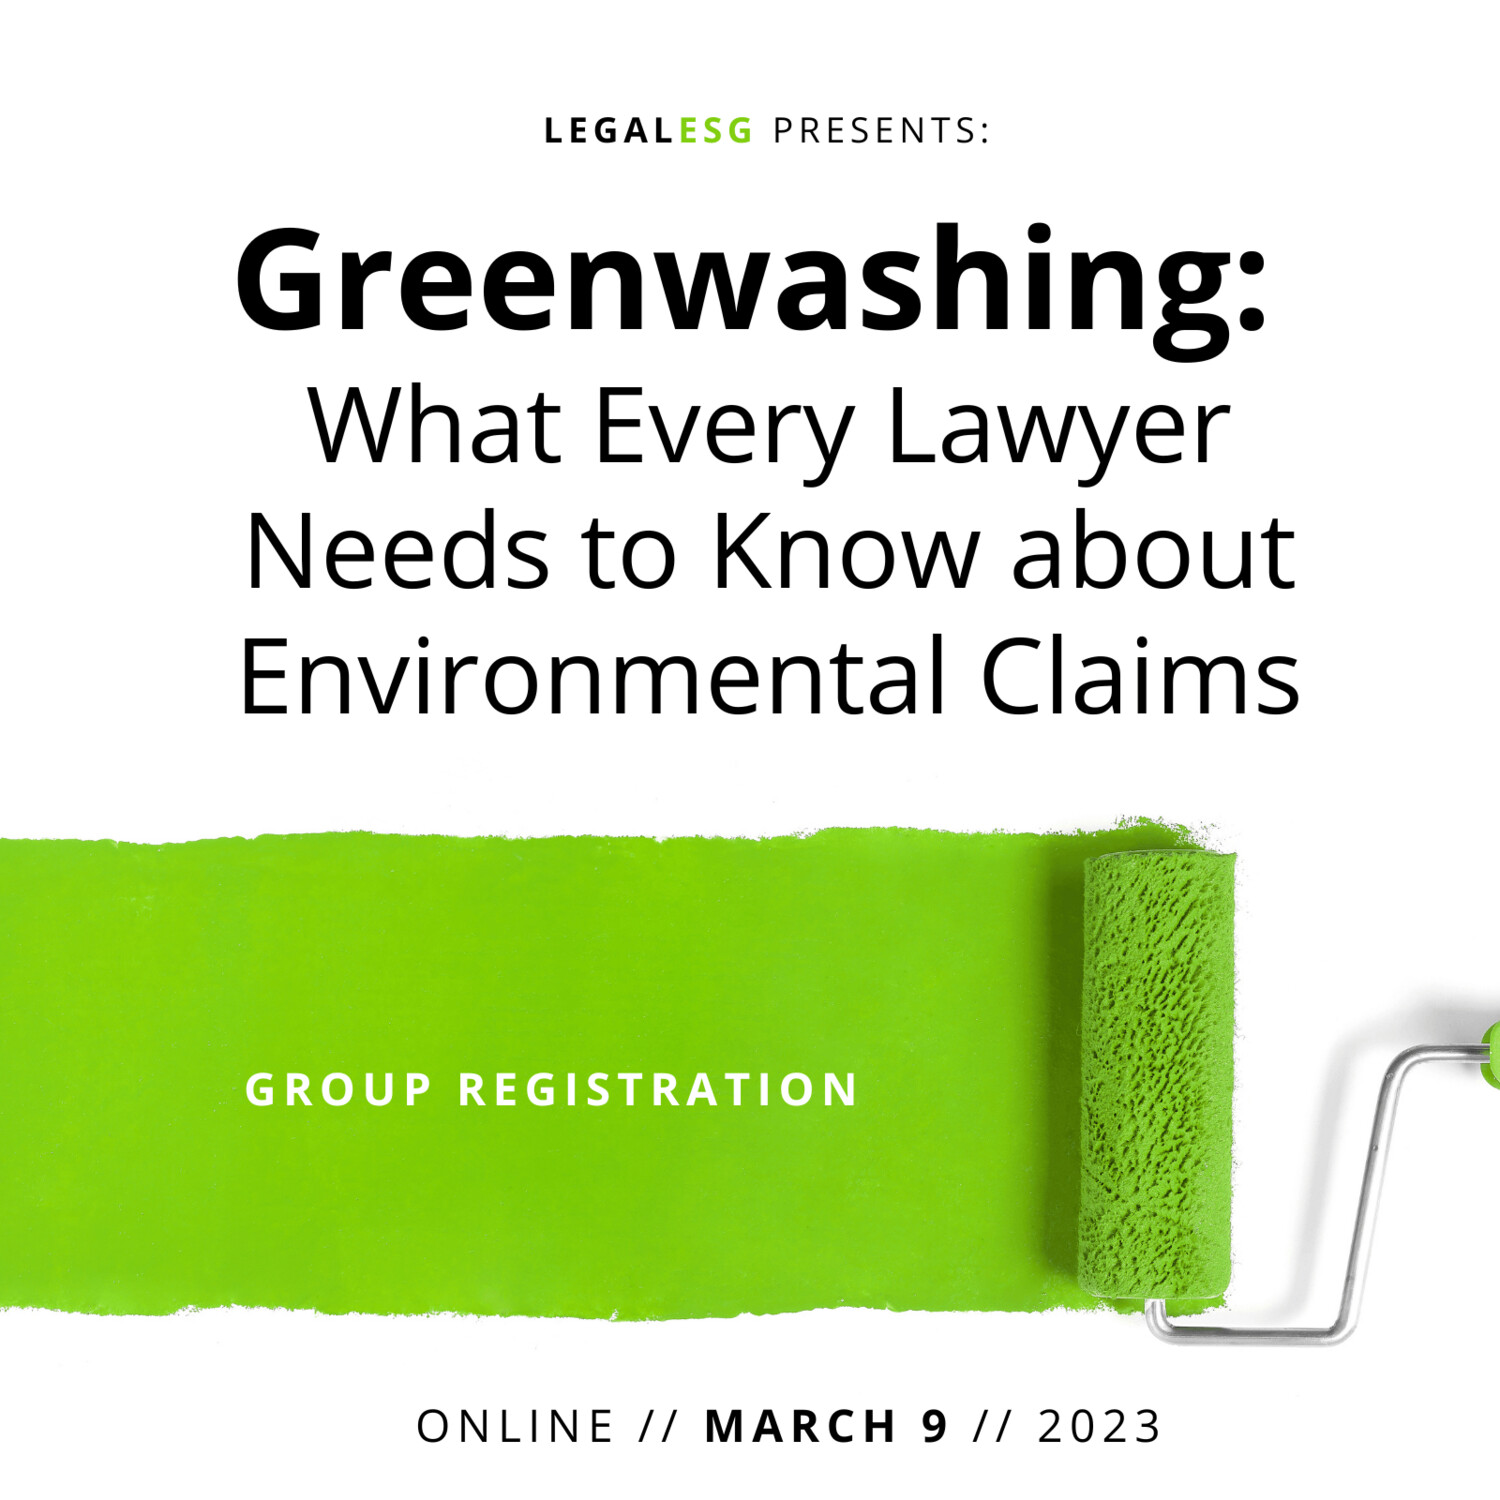 Greenwashing: What Every Lawyer Needs to Know about Environmental Claims Group Enrollment